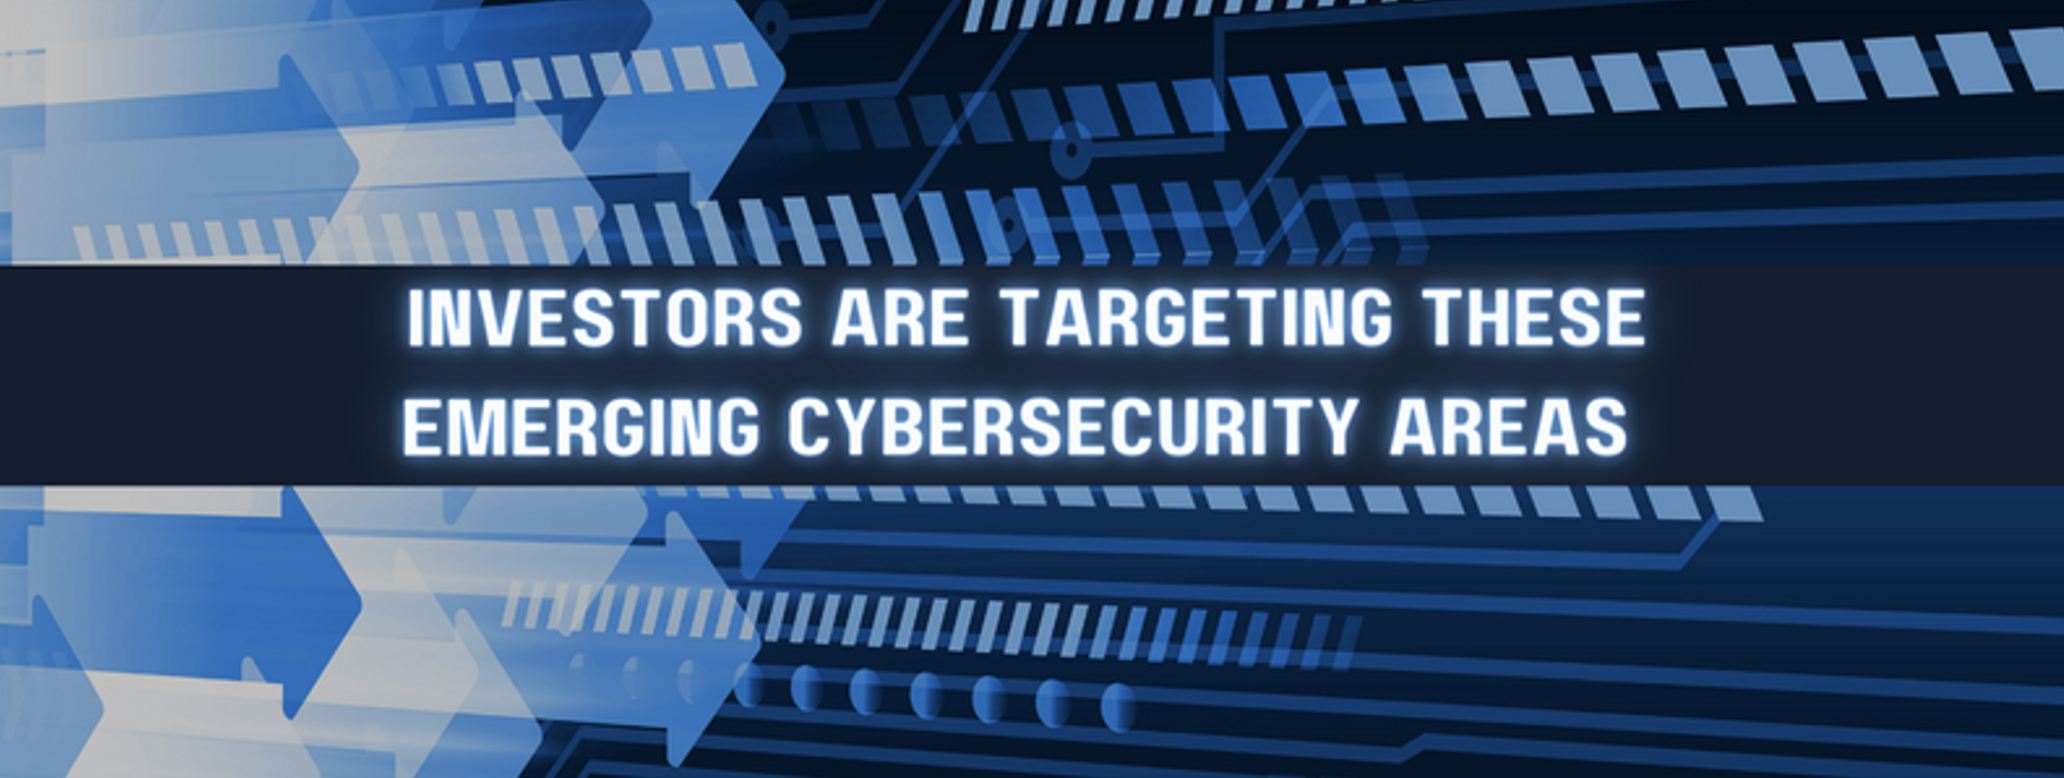 Investors are Targeting These Emerging Cybersecurity Areas